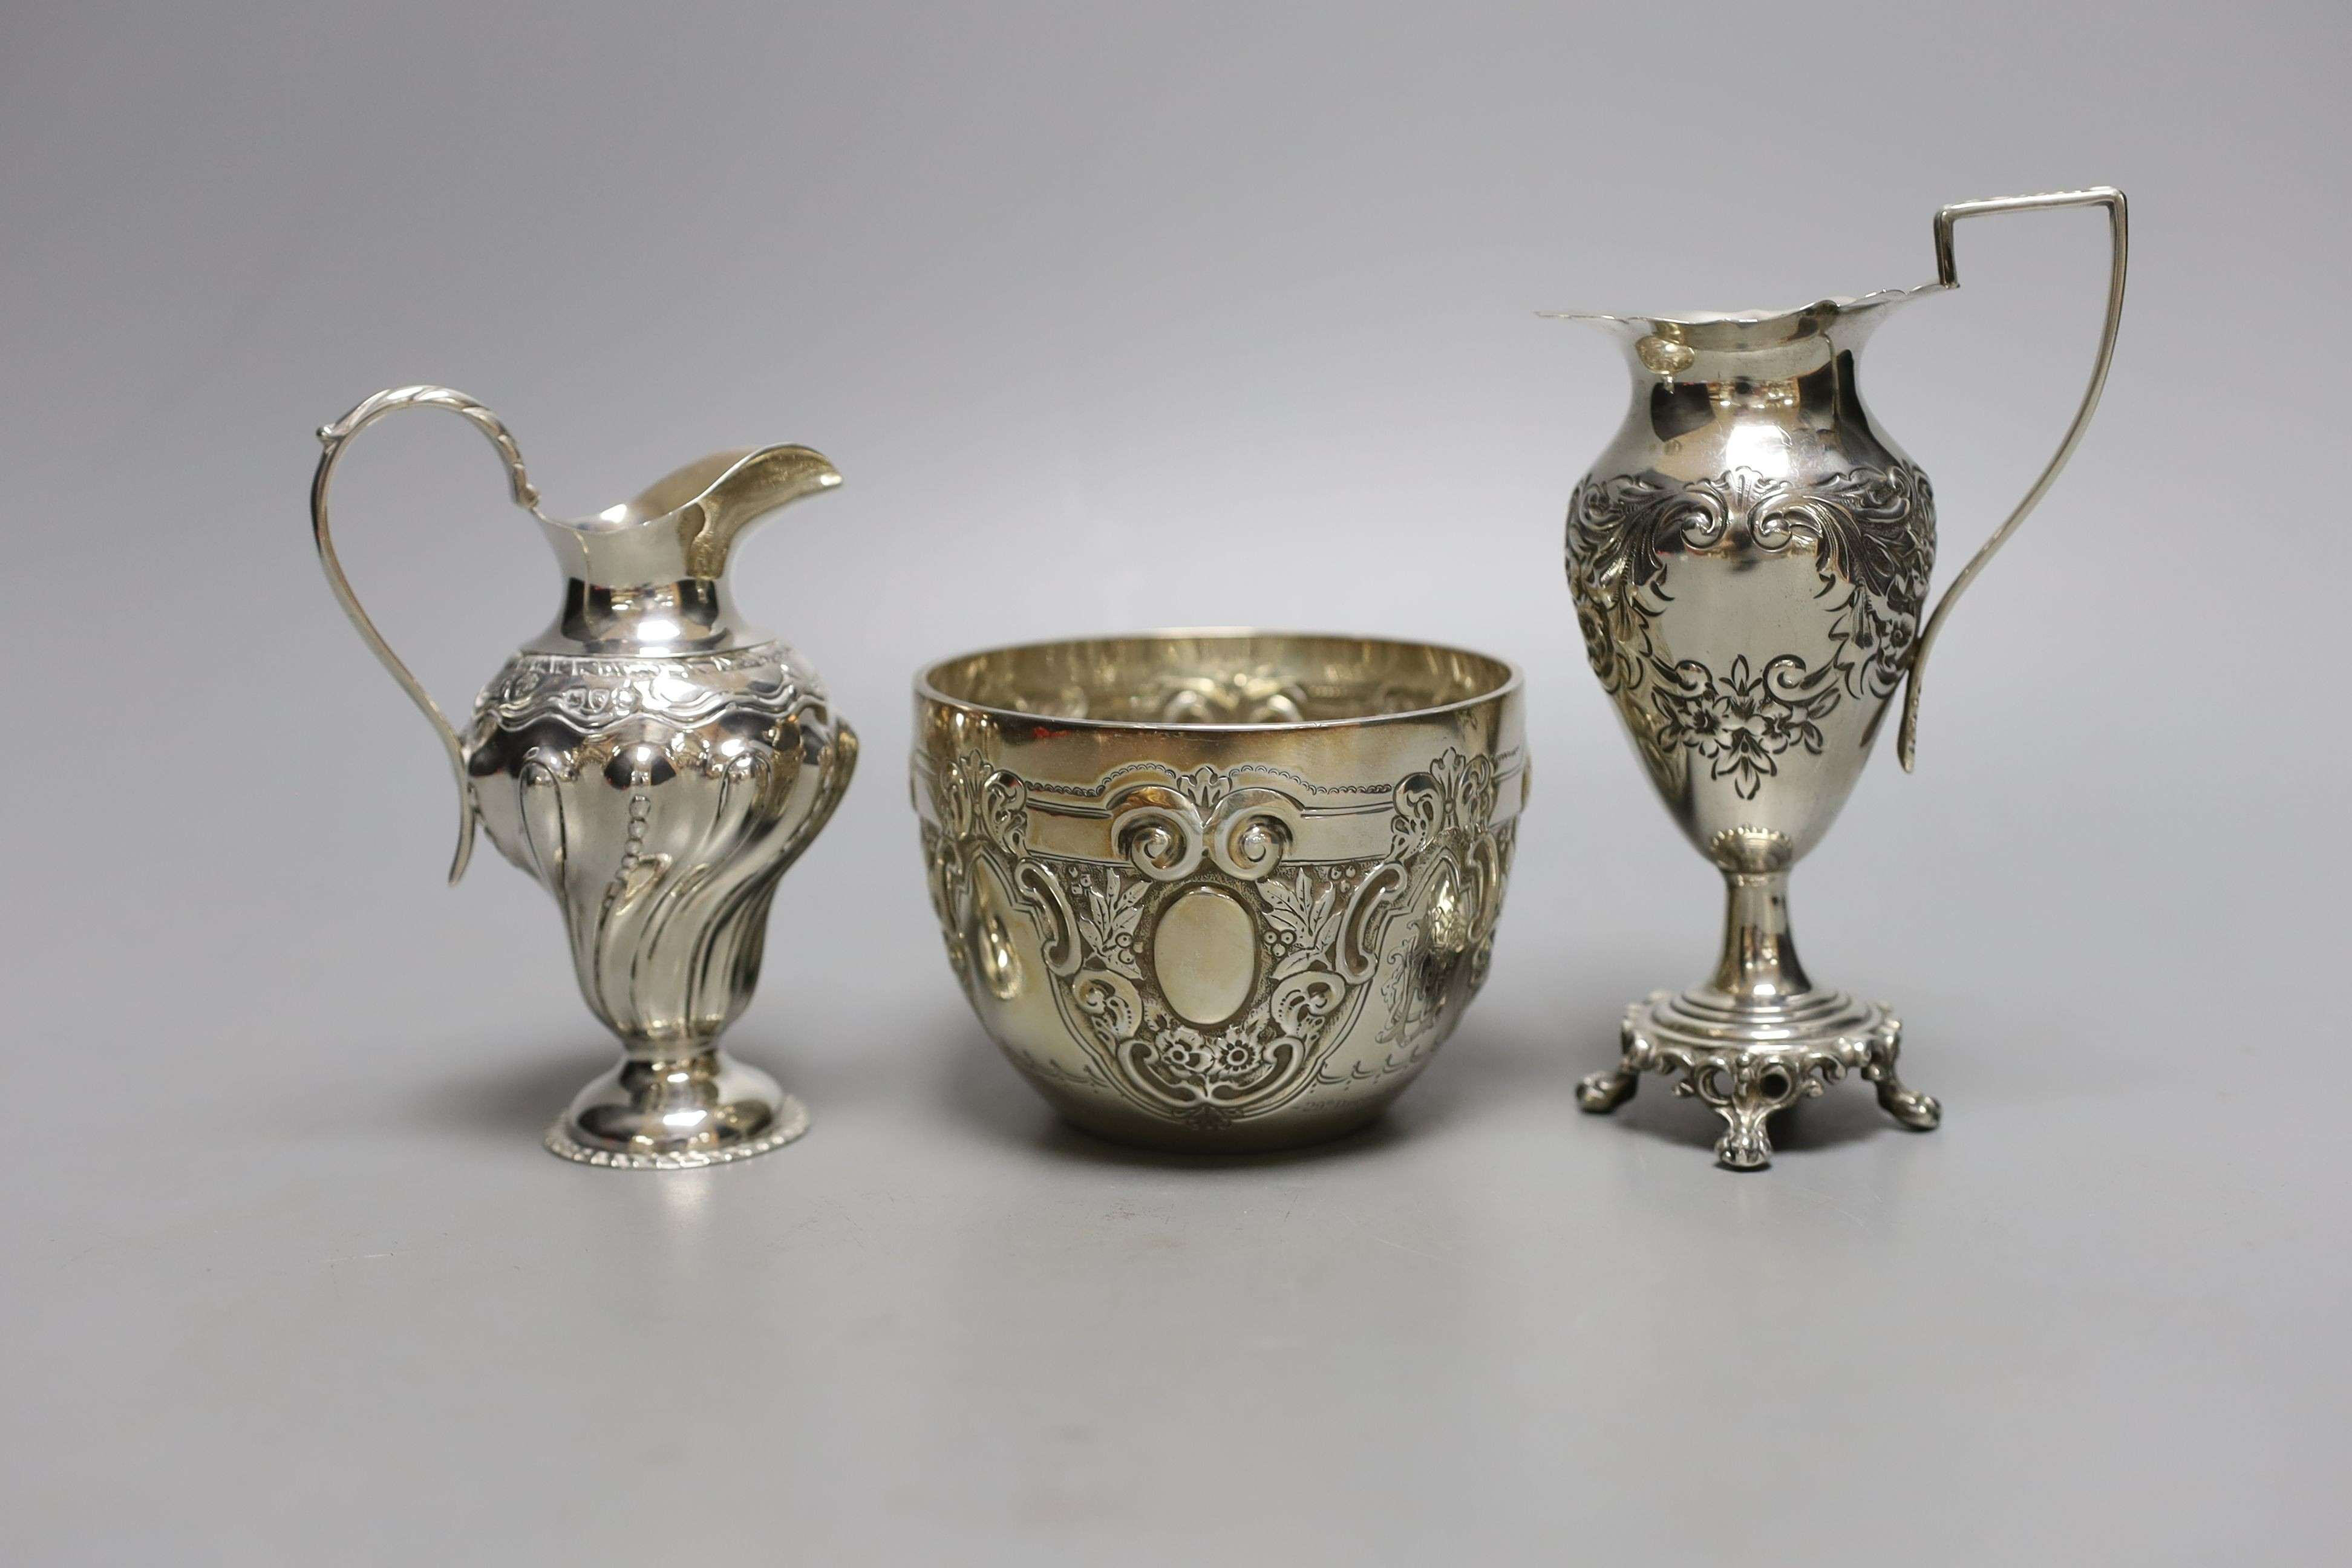 Two late 19th/early 20th century silver cream jugs, 13.5cm, and a late Victorian silver sugar bowl, 10oz.